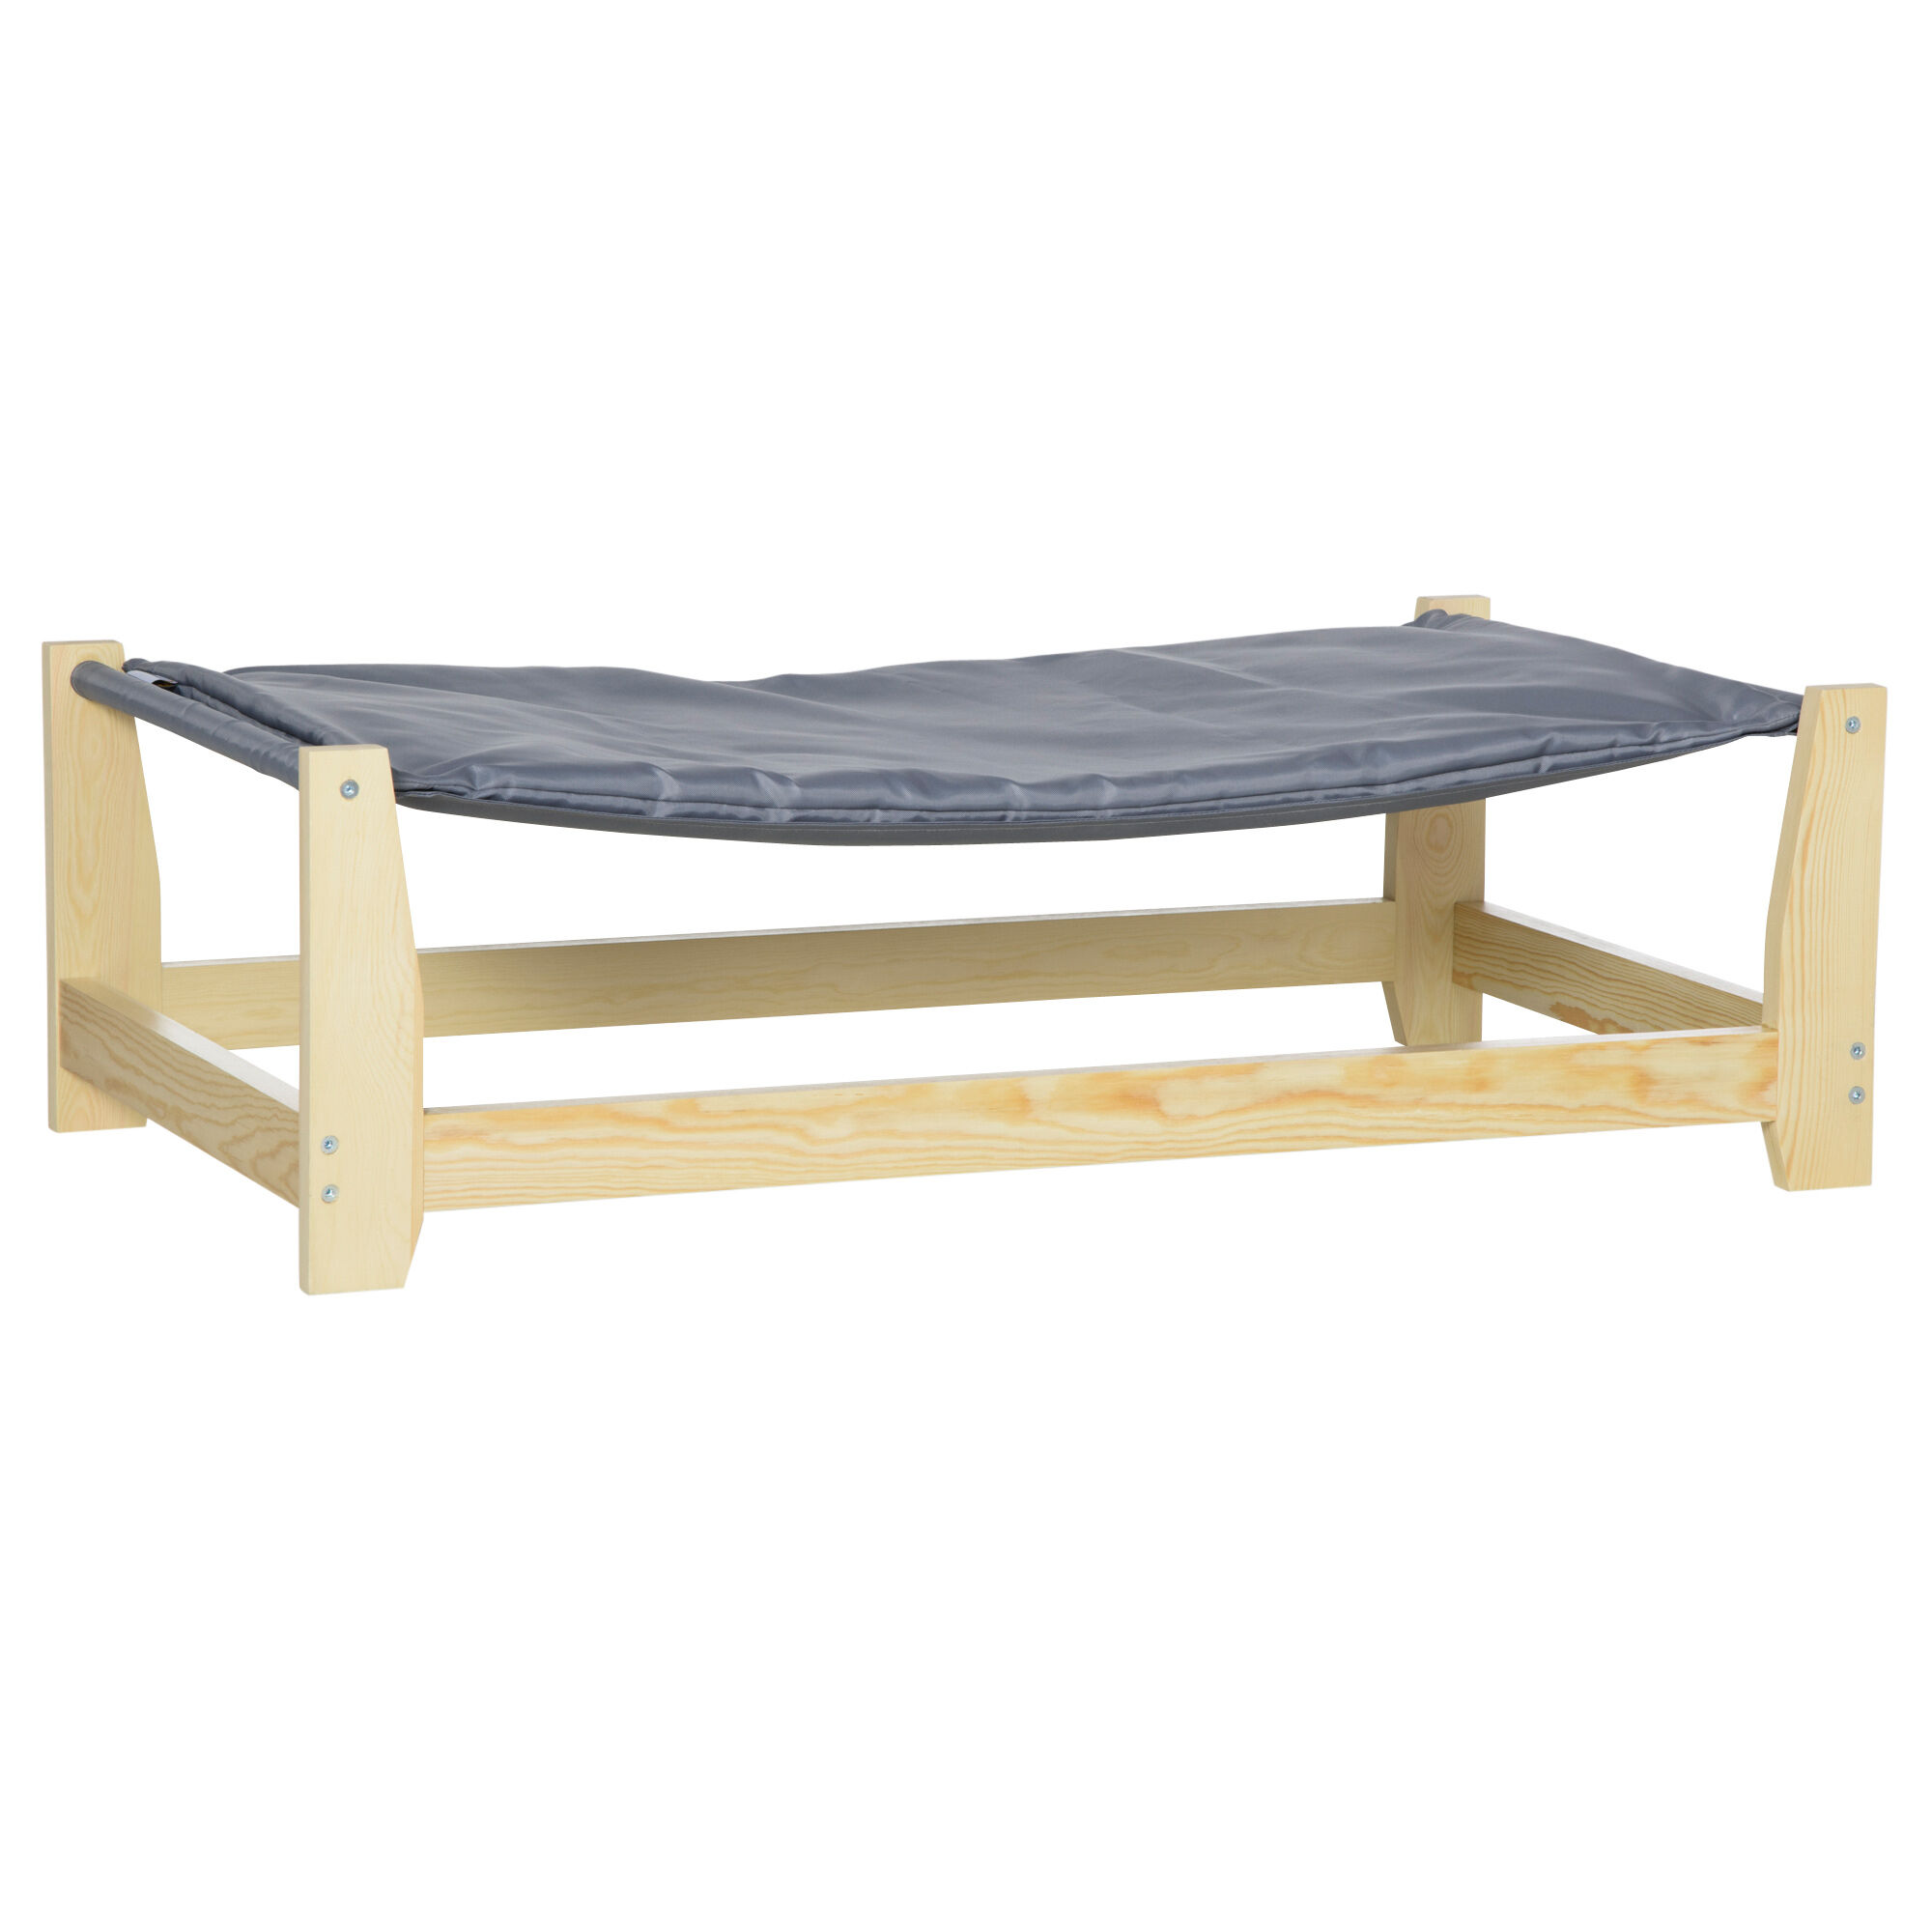 PawHut Raised Pet Bed Wooden Dog Cot with Cushion for Small Medium Sized Dogs Indoor Outdoor, 35.5" x 19.75" x 11"